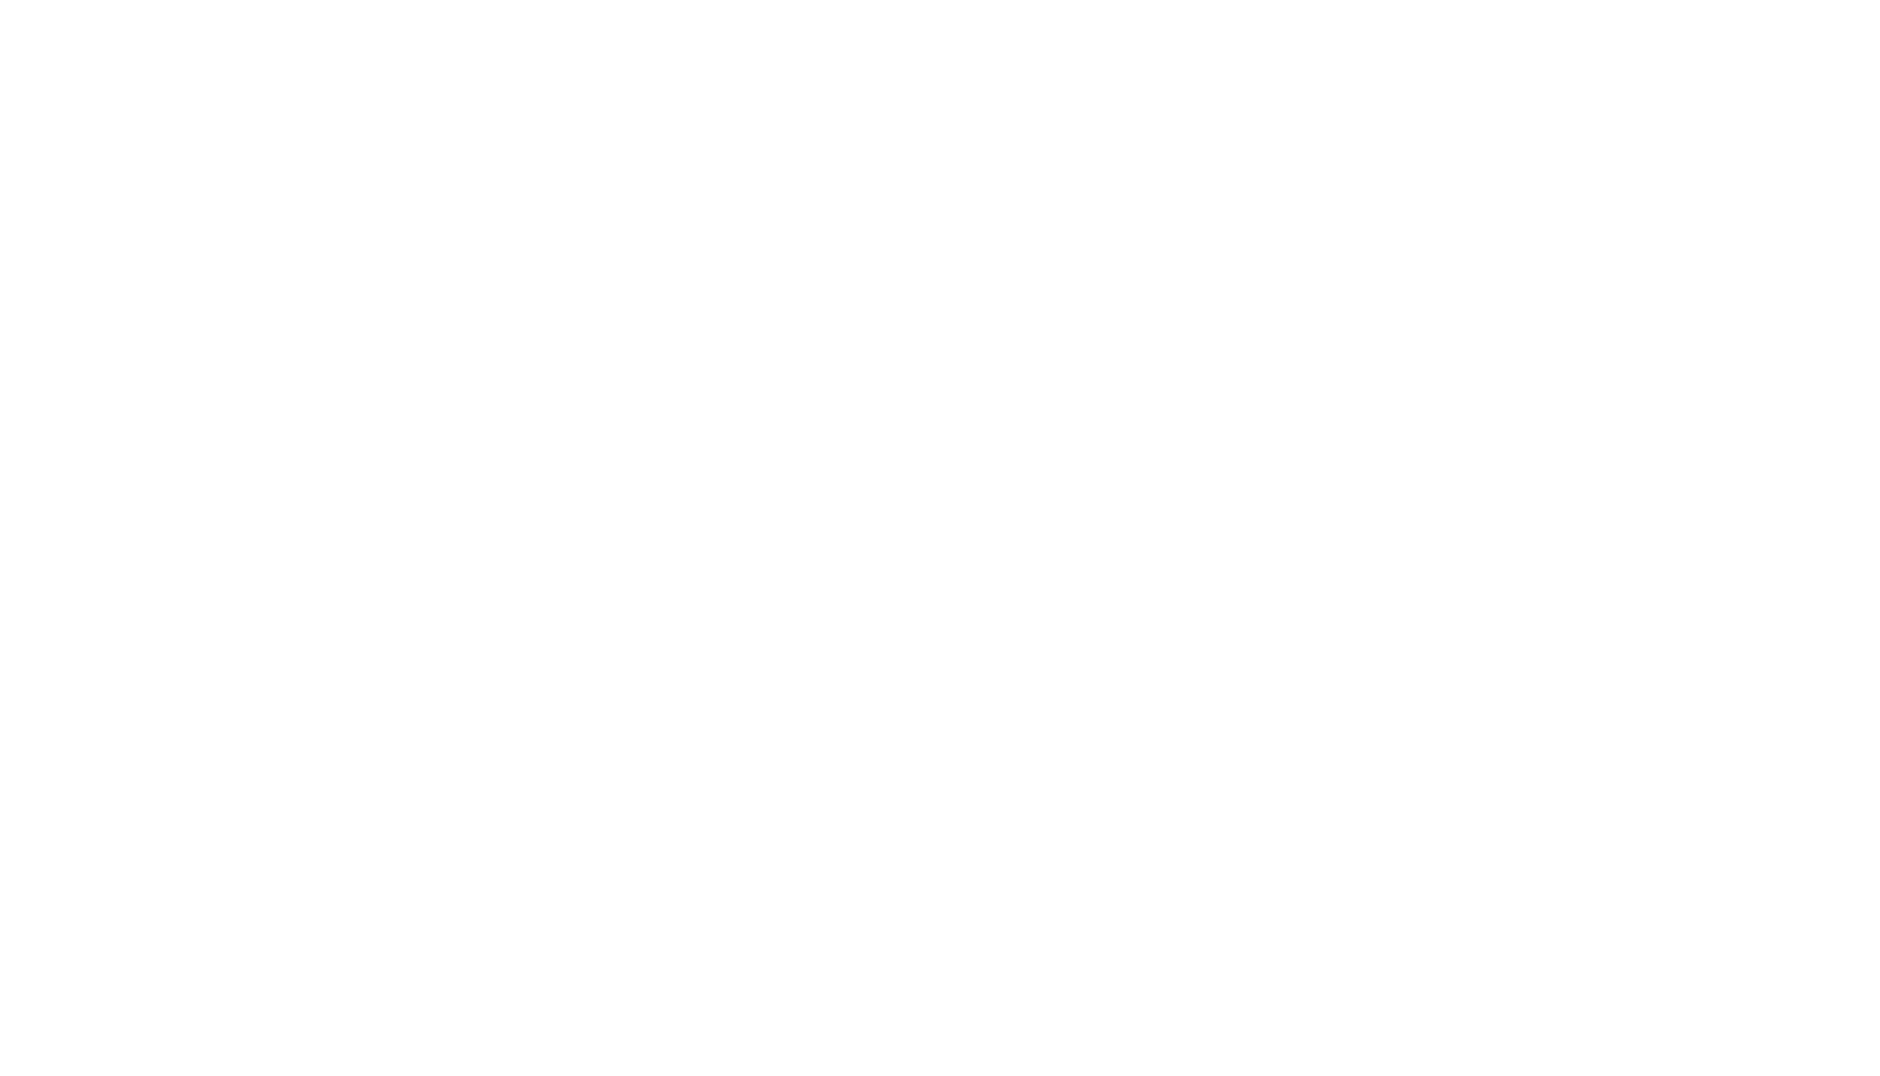 Anderson Power Services is an Authorized Generac Dealer